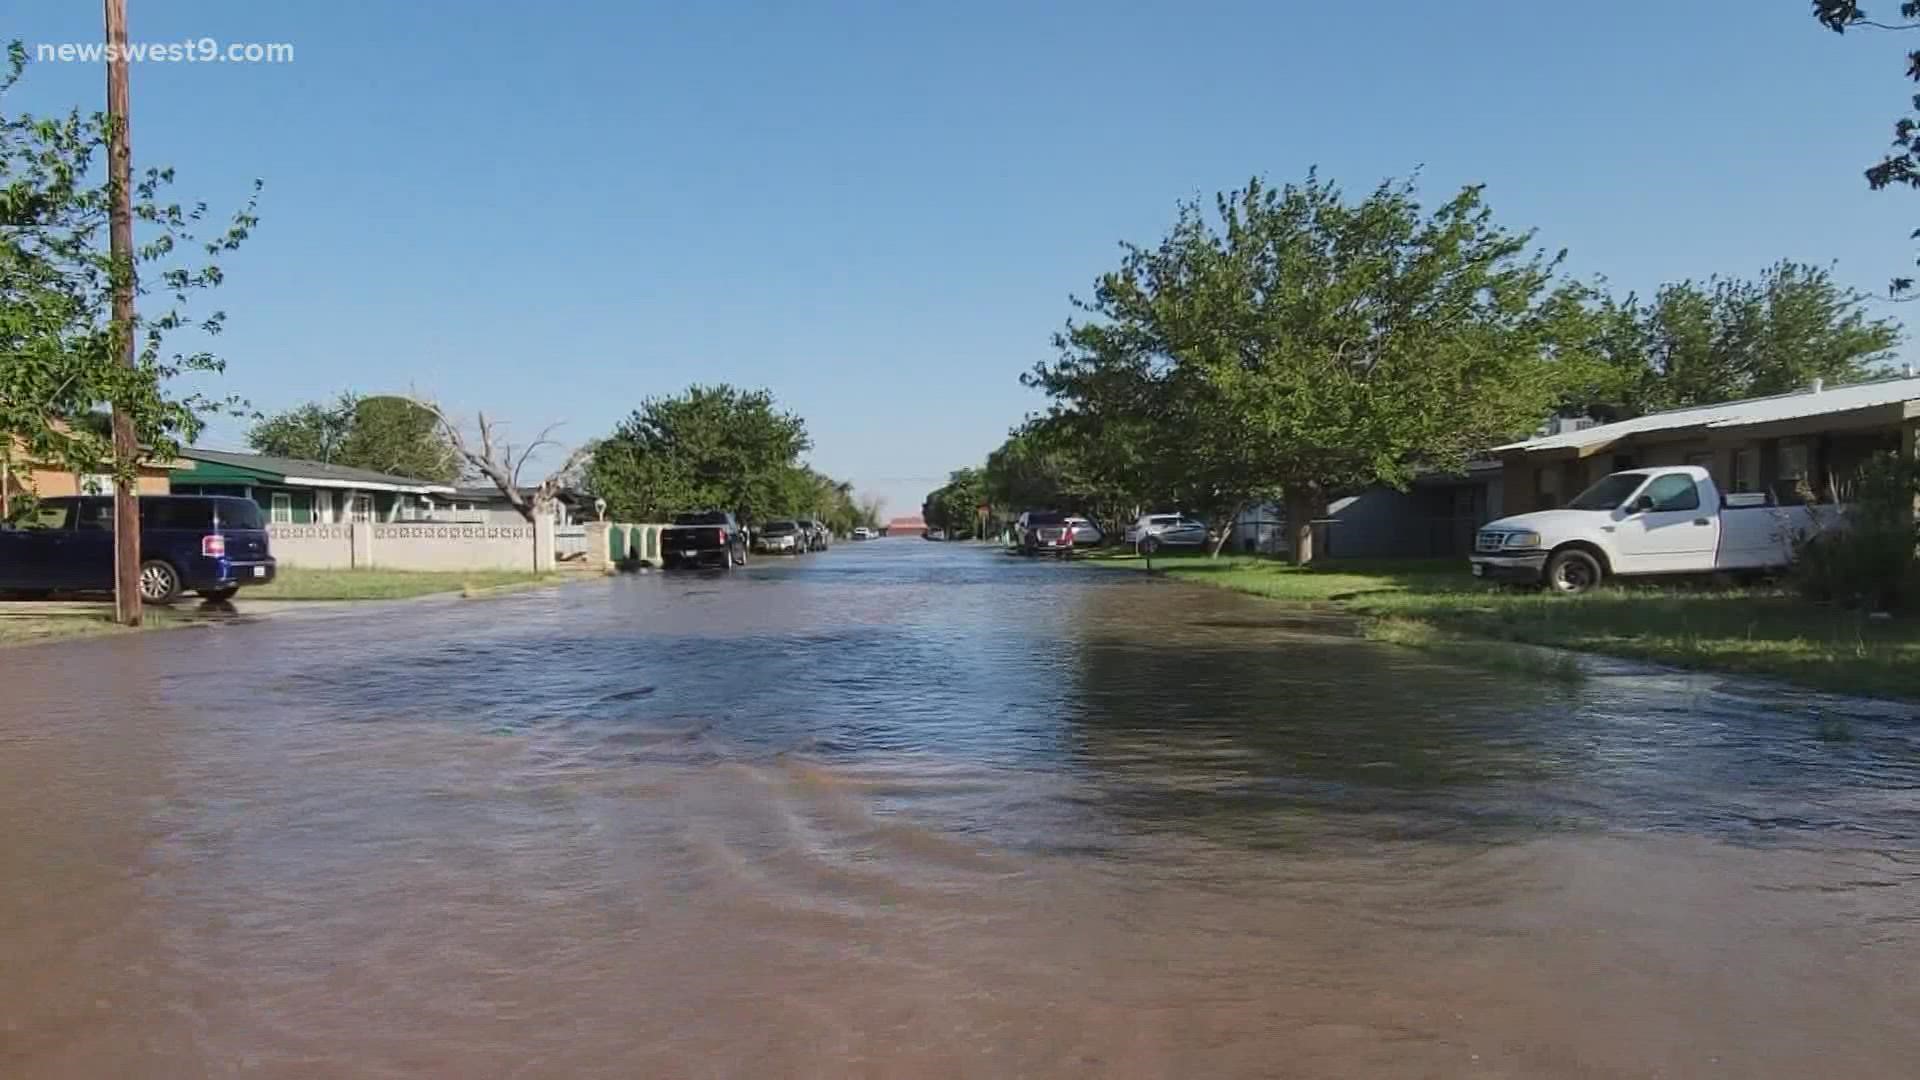 The break, located at the intersection of 42nd Street and San Jacinto Street, has caused flooding in the area.